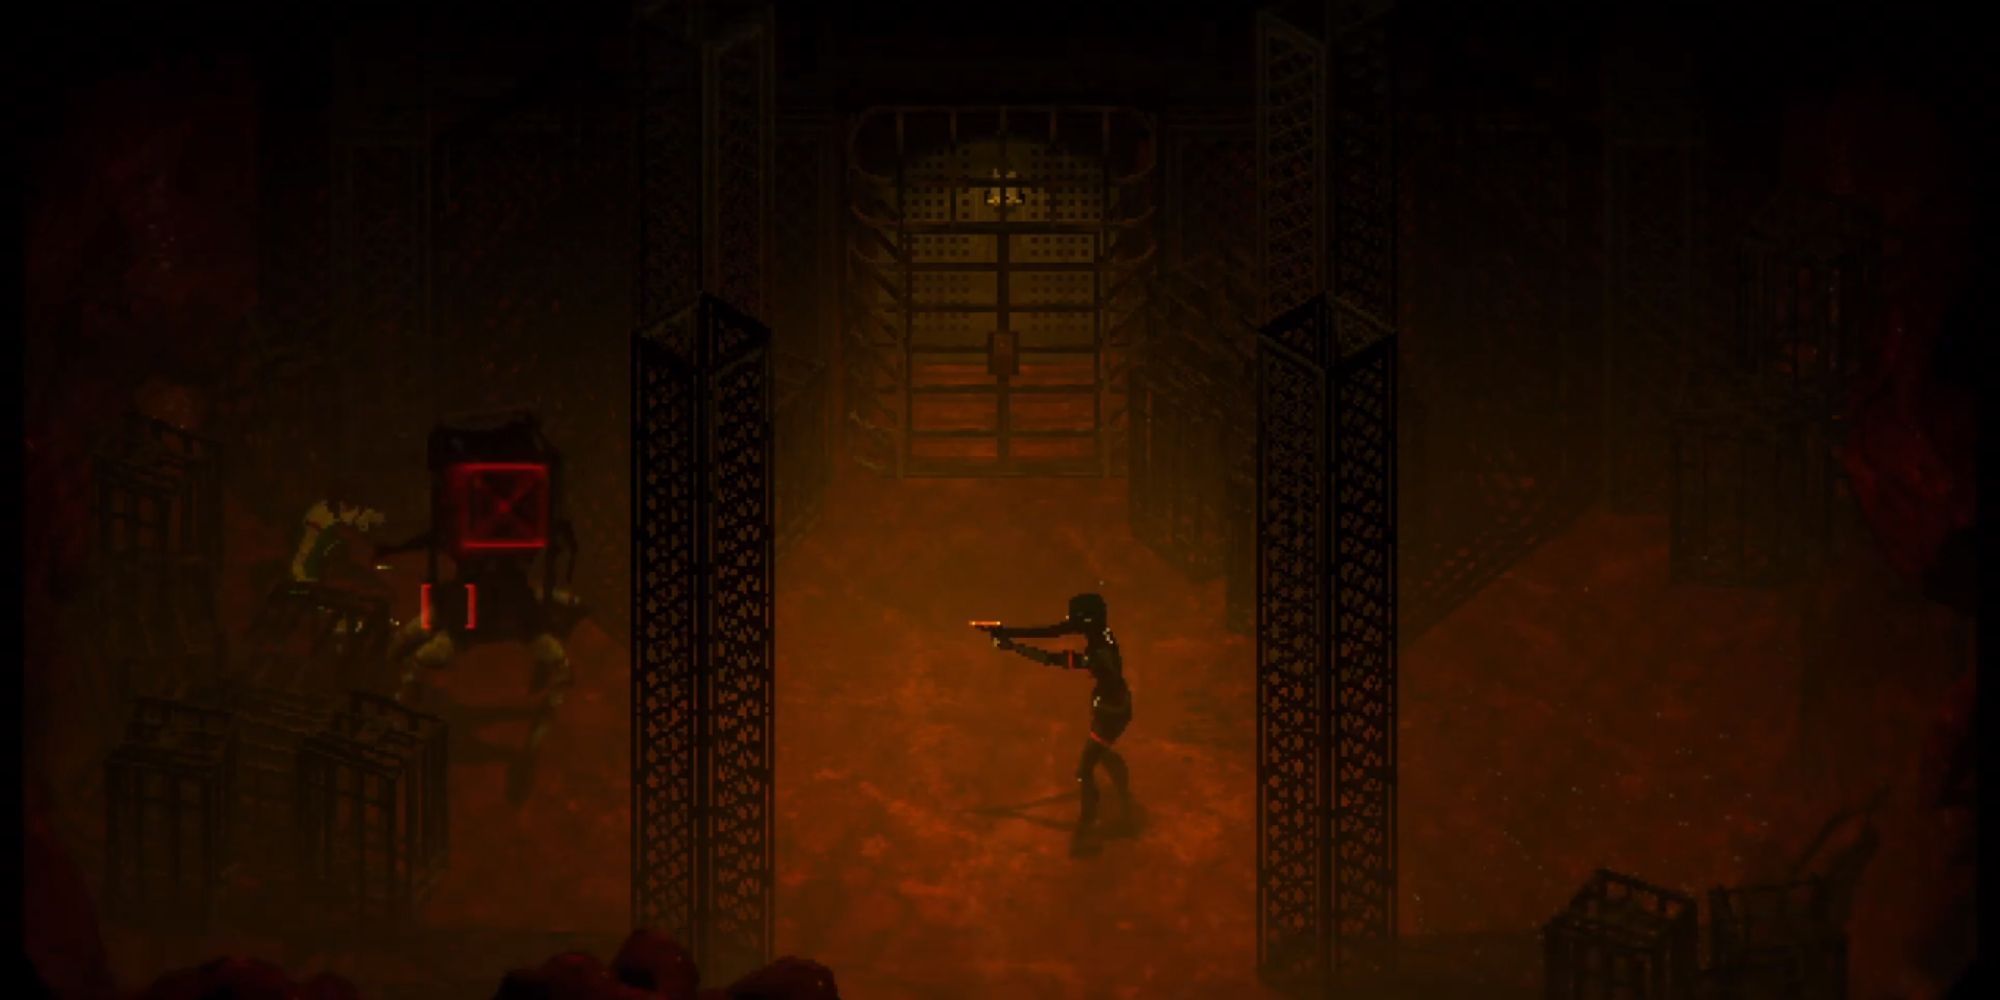 Elster stands in an orange room with two towering pillars at the bottom and a device to the left. The right side is mostly empty.